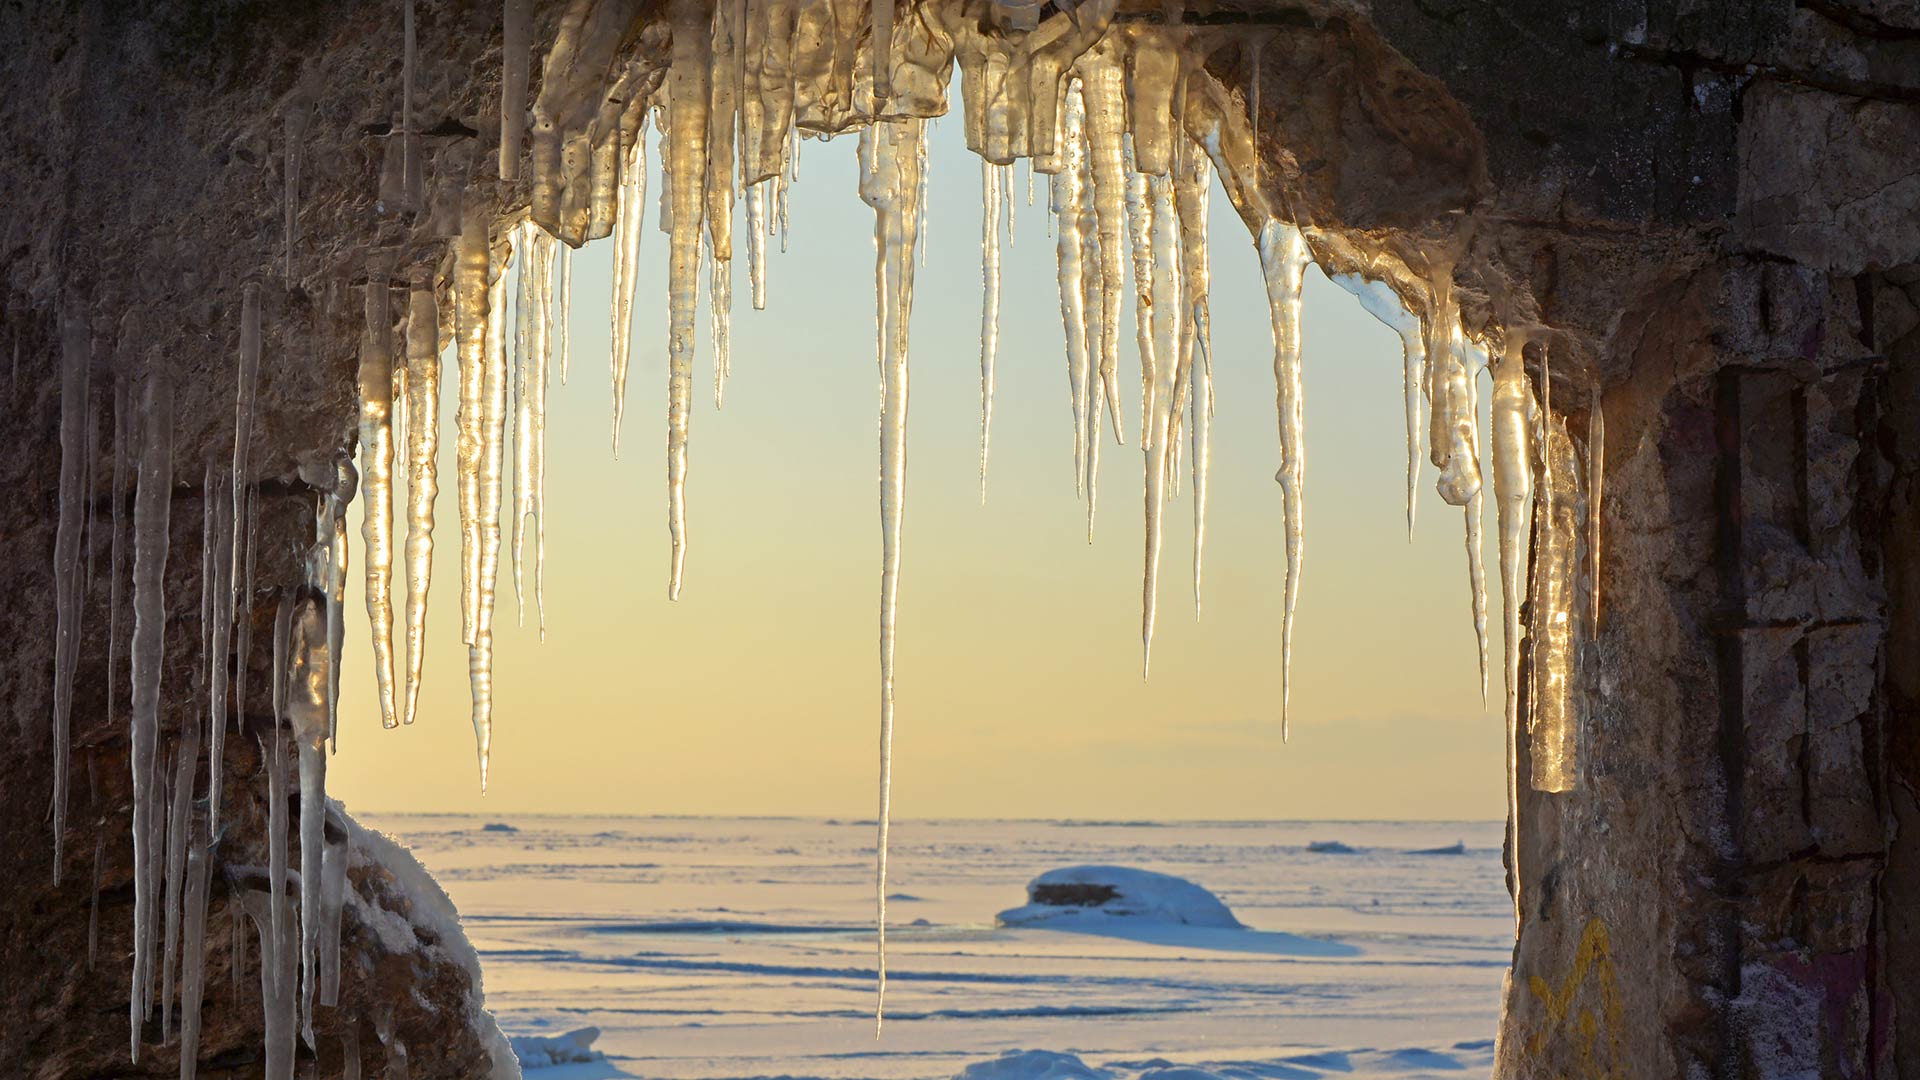 Frozen sea viewed through arch of icicles